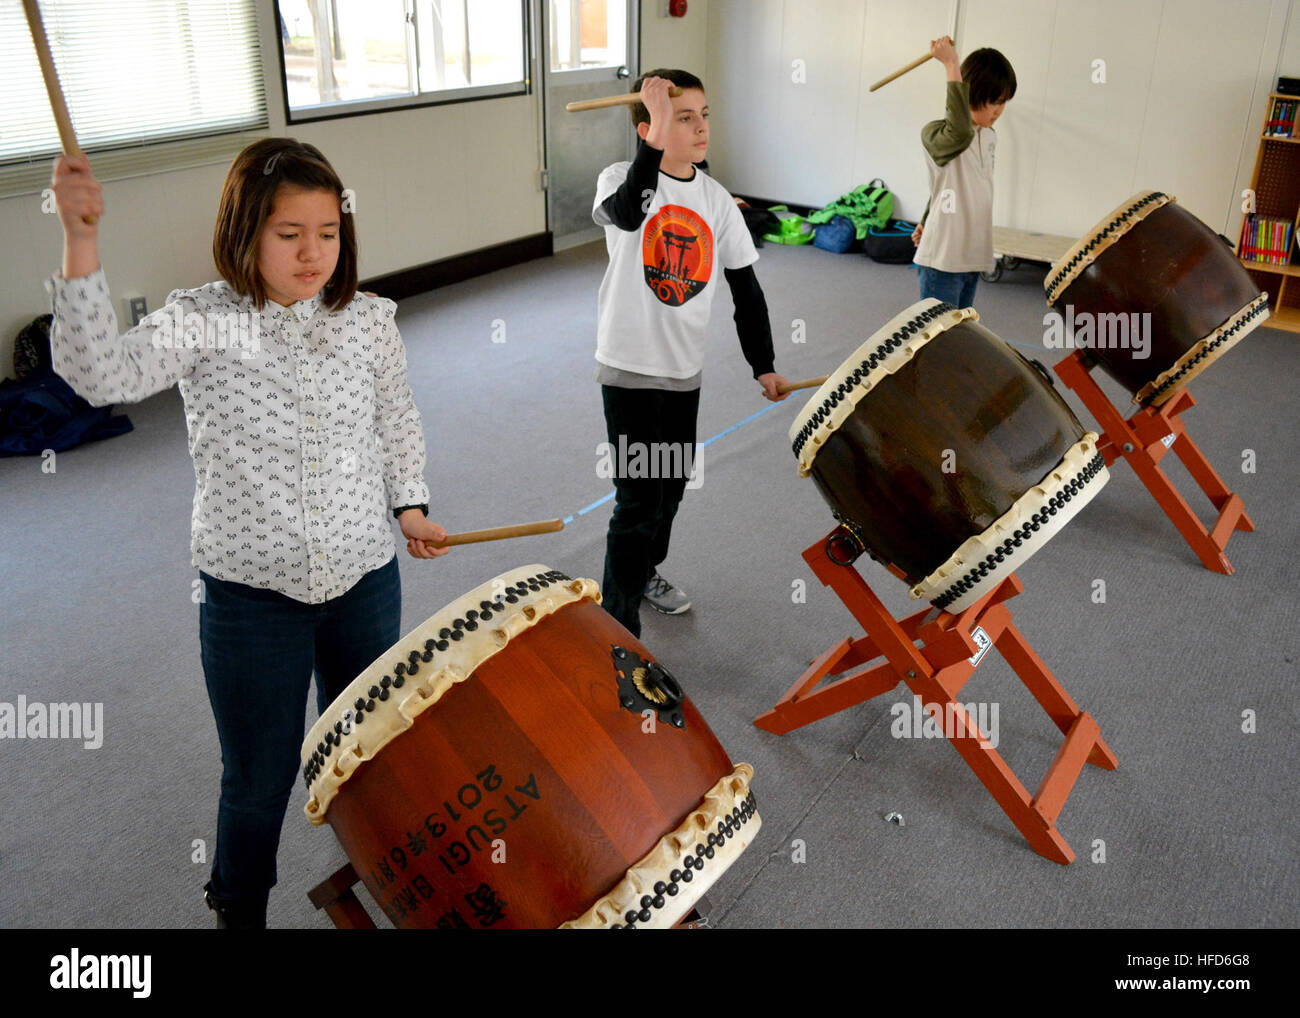 140221-N-OX321-137 NAVAL AIR FACILITY ATSUGI, Japan (Feb. 21, 2014) – Shirley Lanham Elementary School students practice taiko for an upcoming performance at the Japan-U.S. Sports Festival in Ayase, Japan. The event consists of the SLES taiko players, a tea ceremony conducted by Naval Air Facility Atsugi community members, and soccer and baseball games. (U.S. Navy photo by Mass Communication Specialist 2nd Class Kegan E. Kay/Released) Sports festival 140221-N-OX321-137 Stock Photo